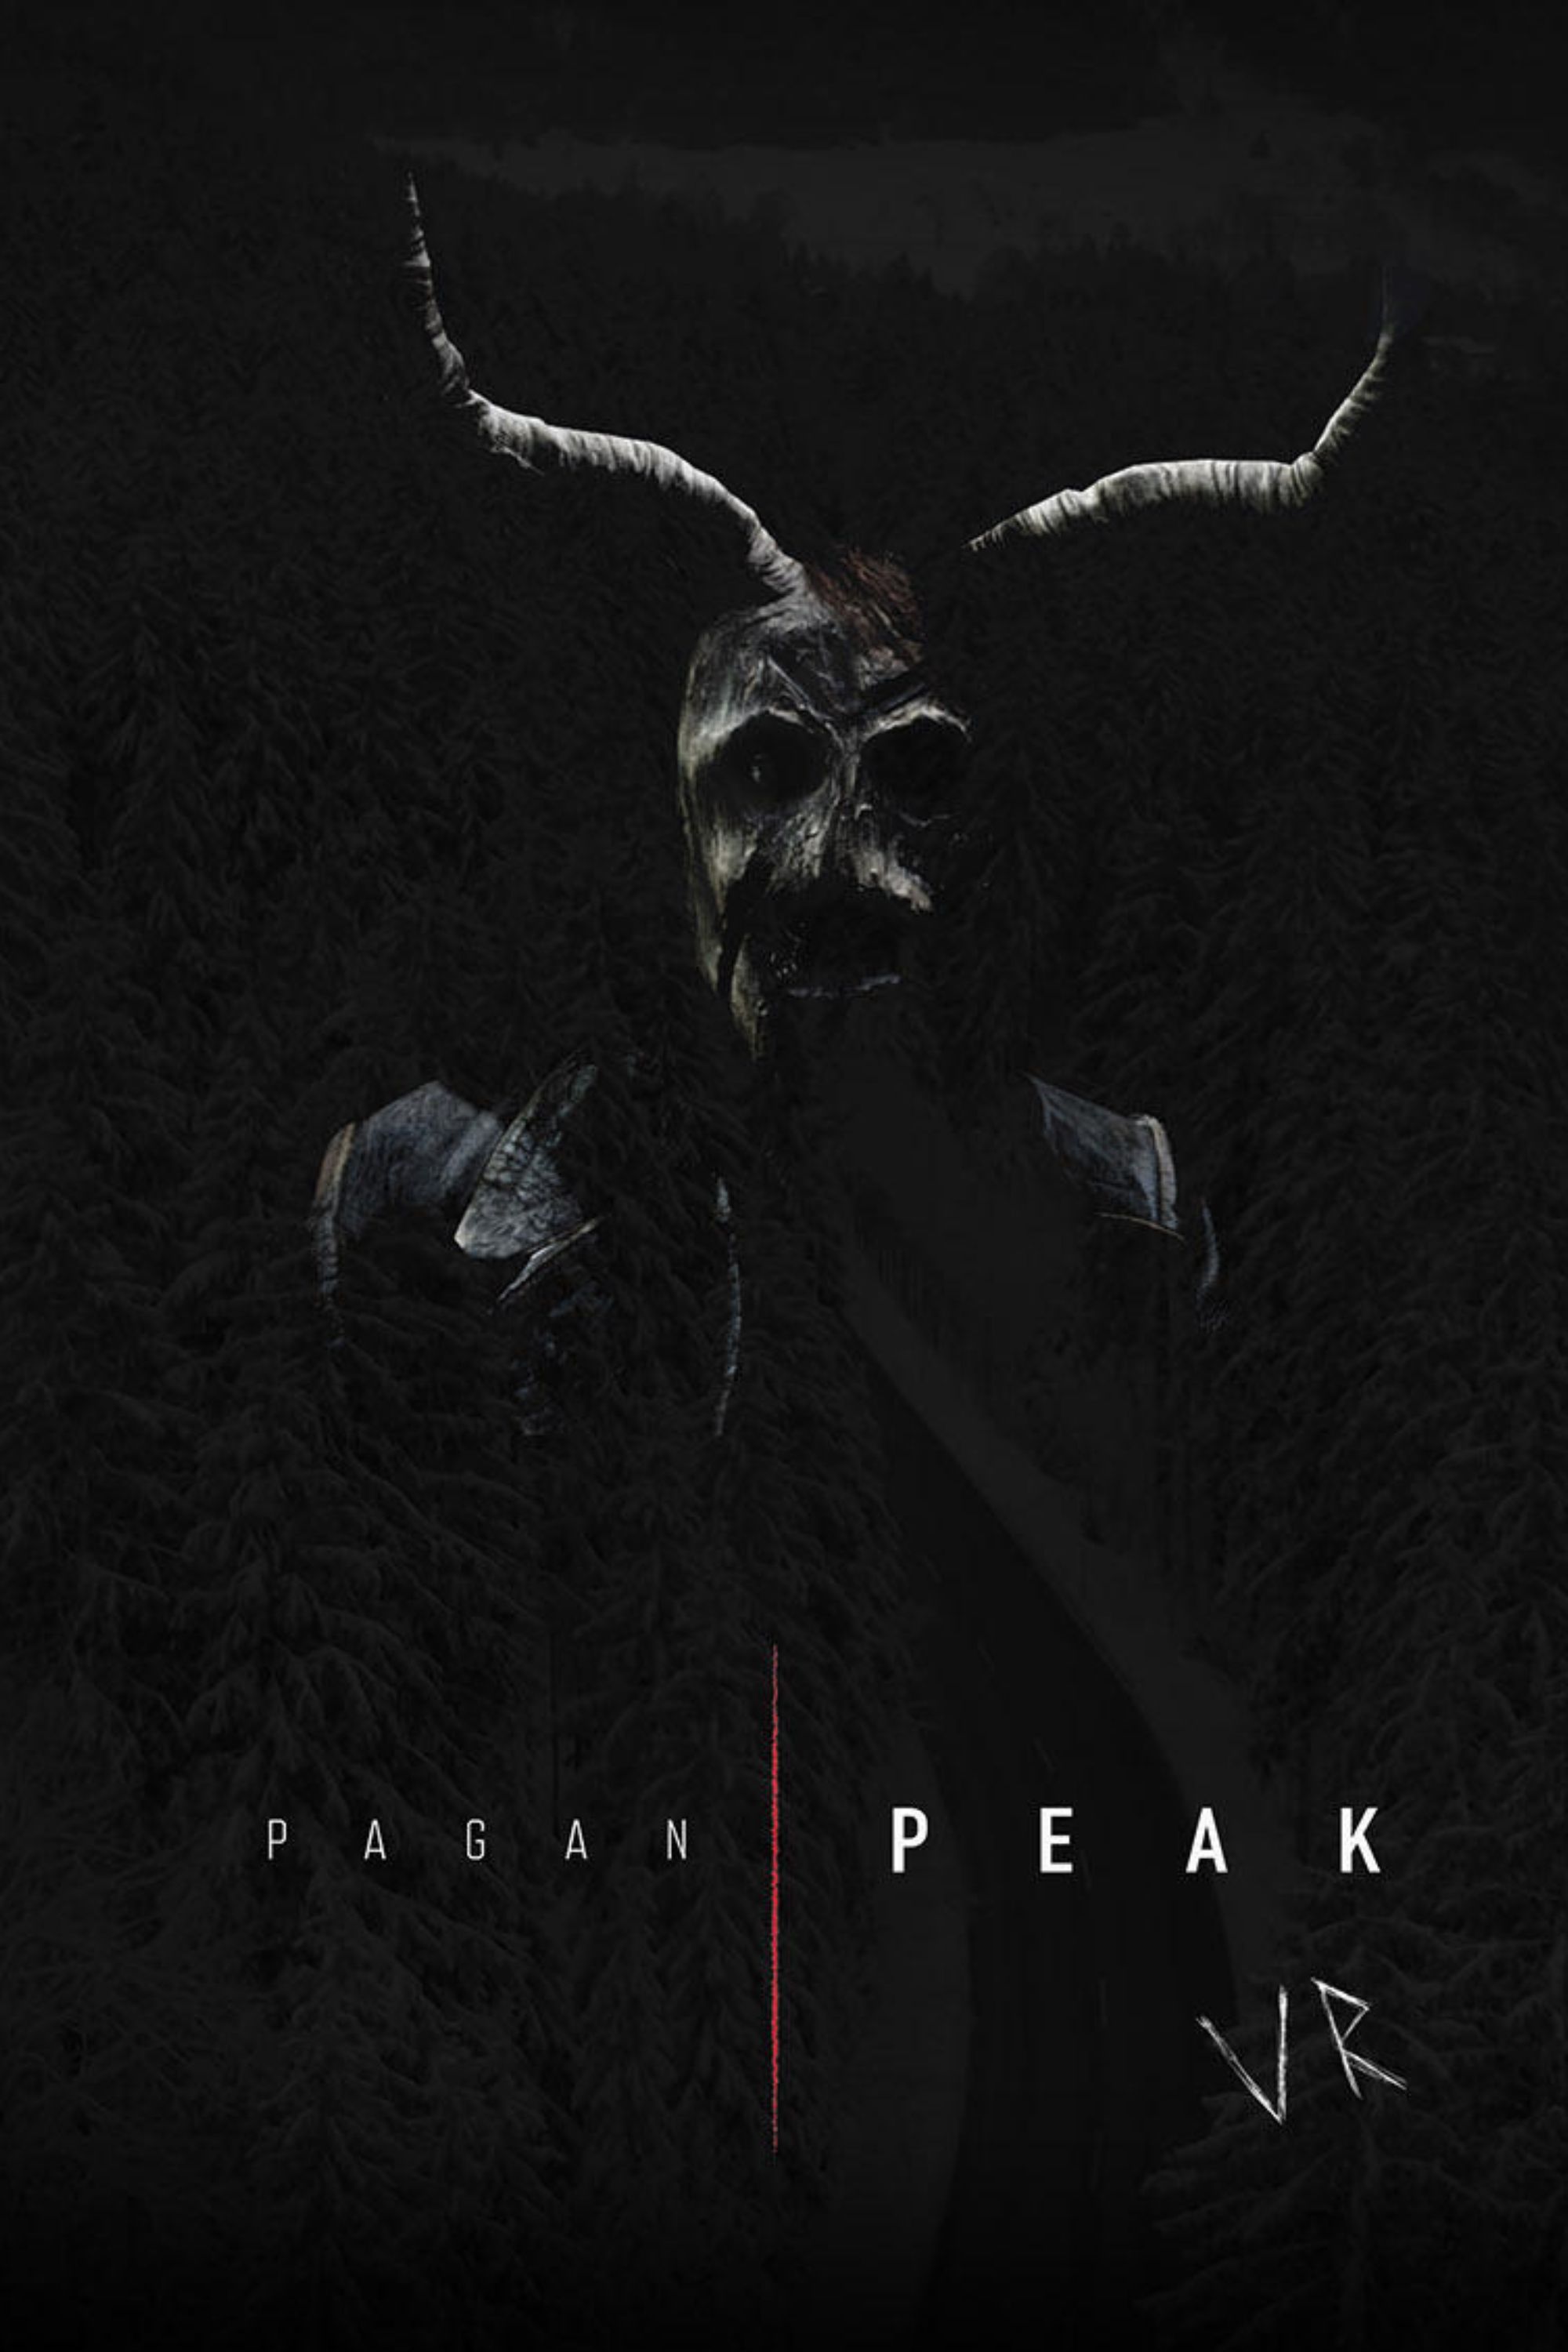 Cover image for the Pagan Peak VR on Steam showing a masked killer with the game's title